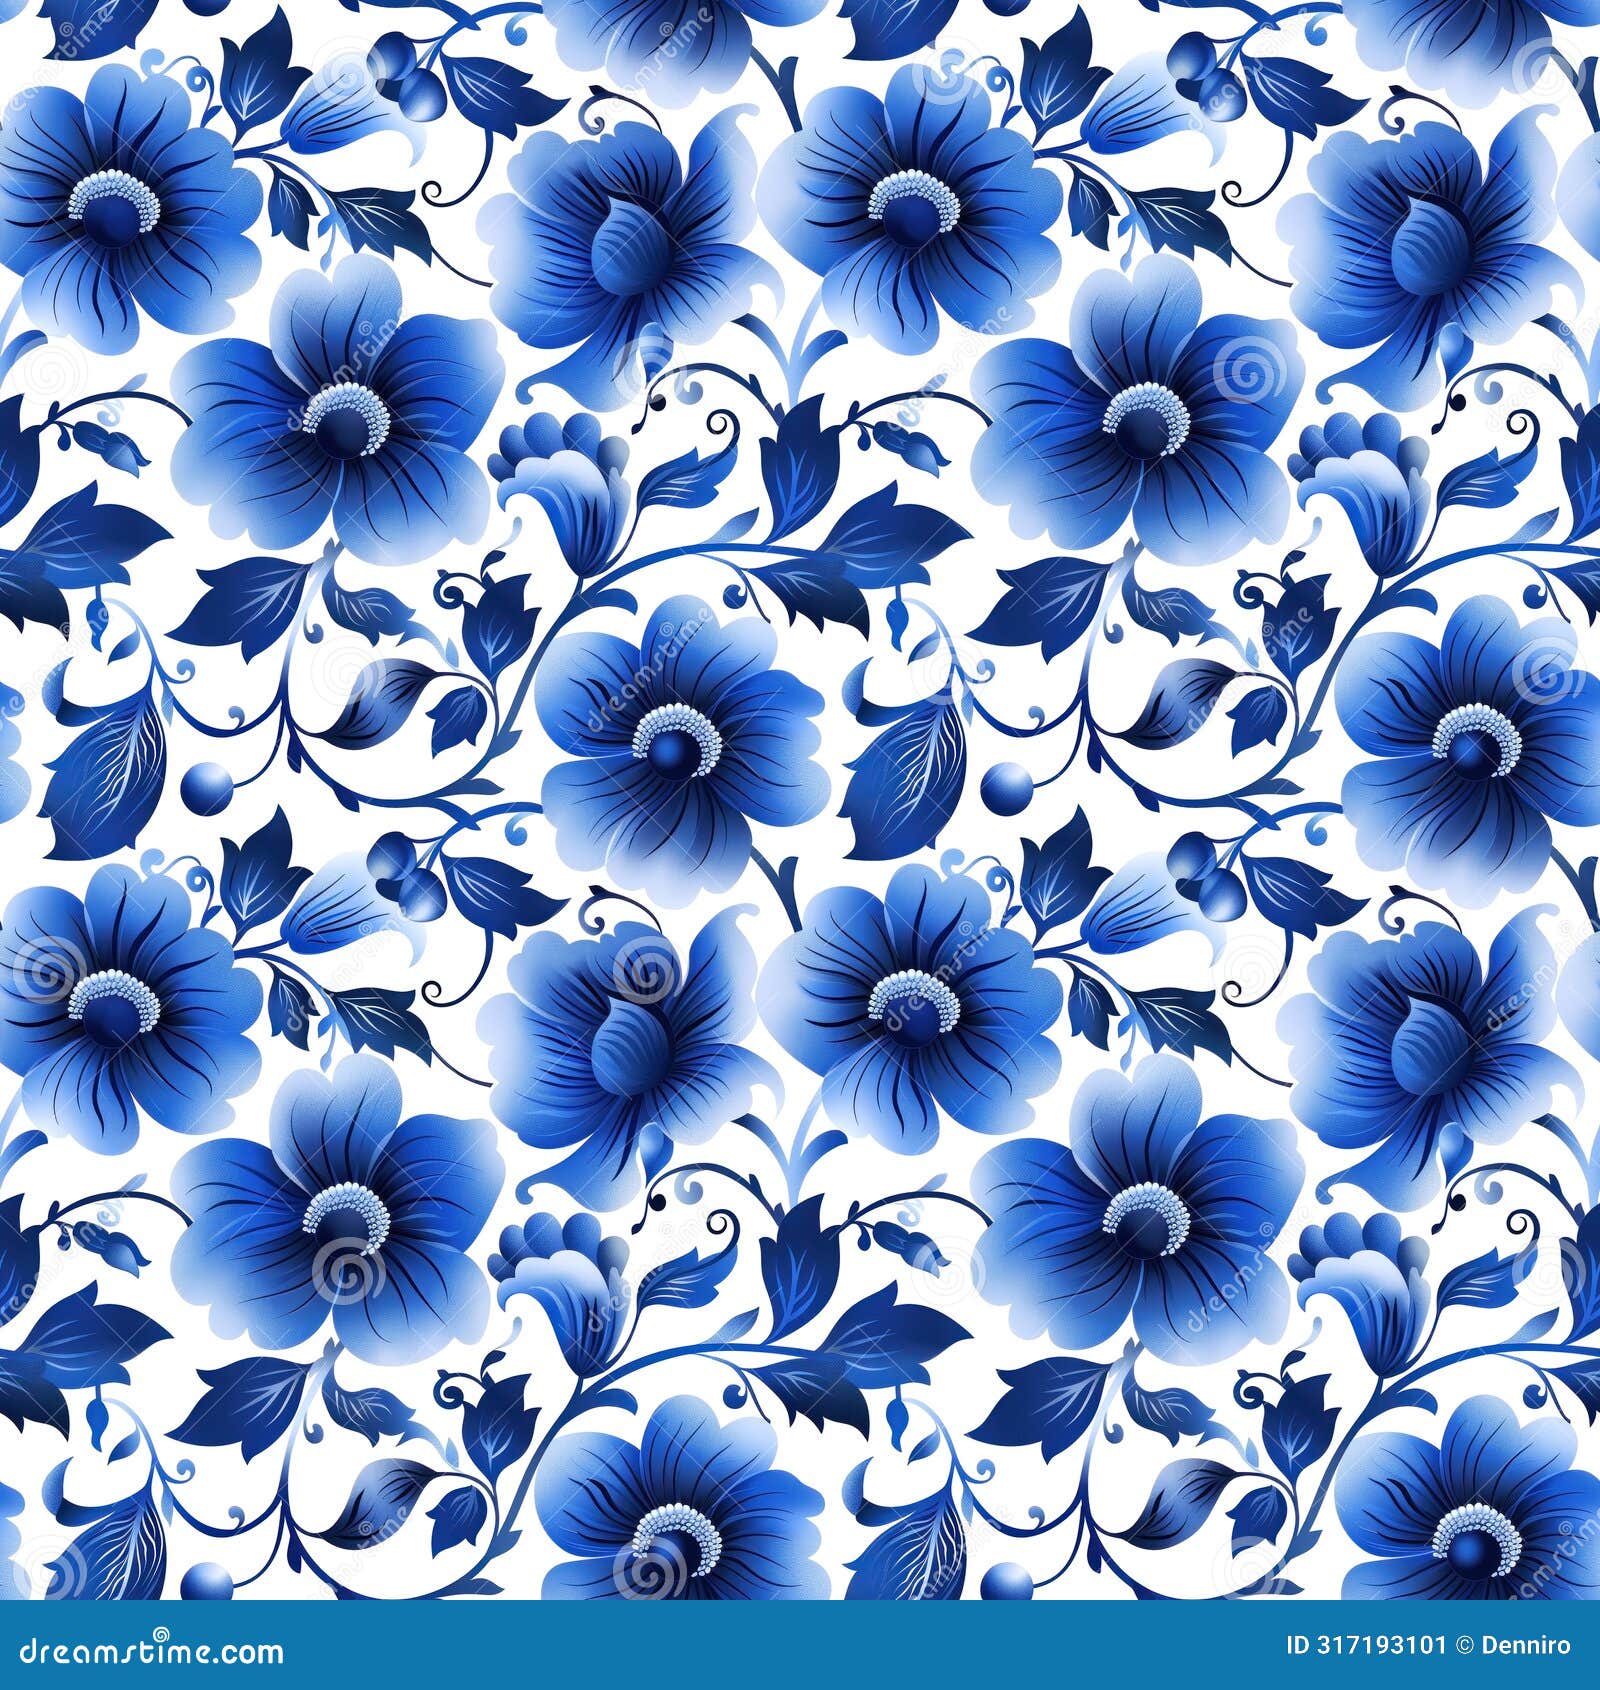 seamless blue and white floral gzhel pattern with intricate flowers and leaves